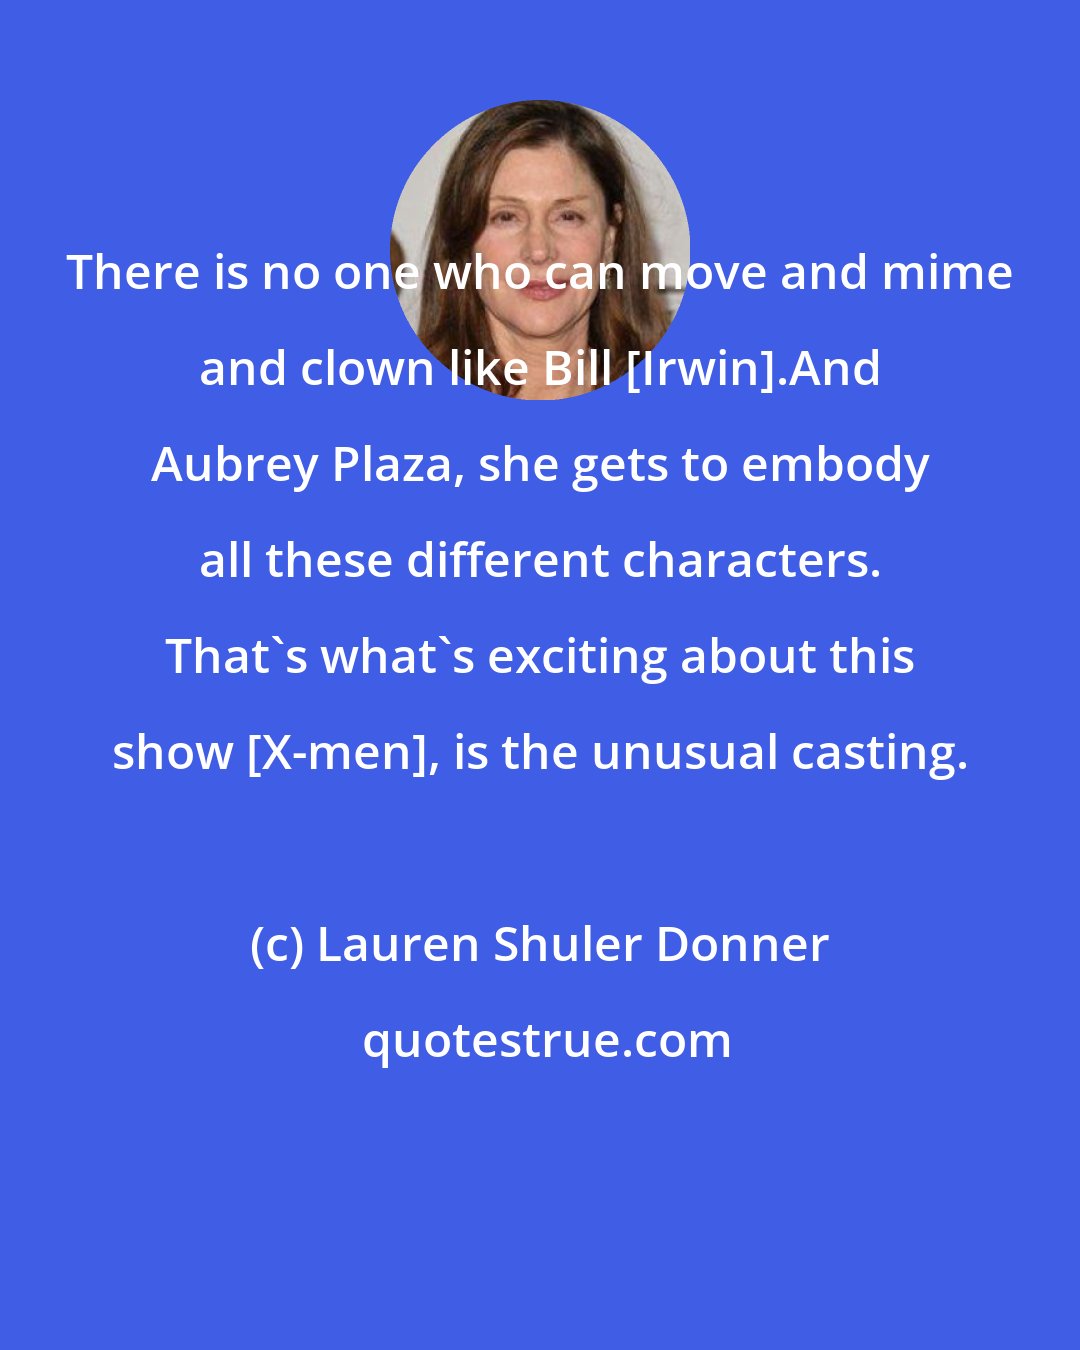 Lauren Shuler Donner: There is no one who can move and mime and clown like Bill [Irwin].And Aubrey Plaza, she gets to embody all these different characters. That's what's exciting about this show [X-men], is the unusual casting.